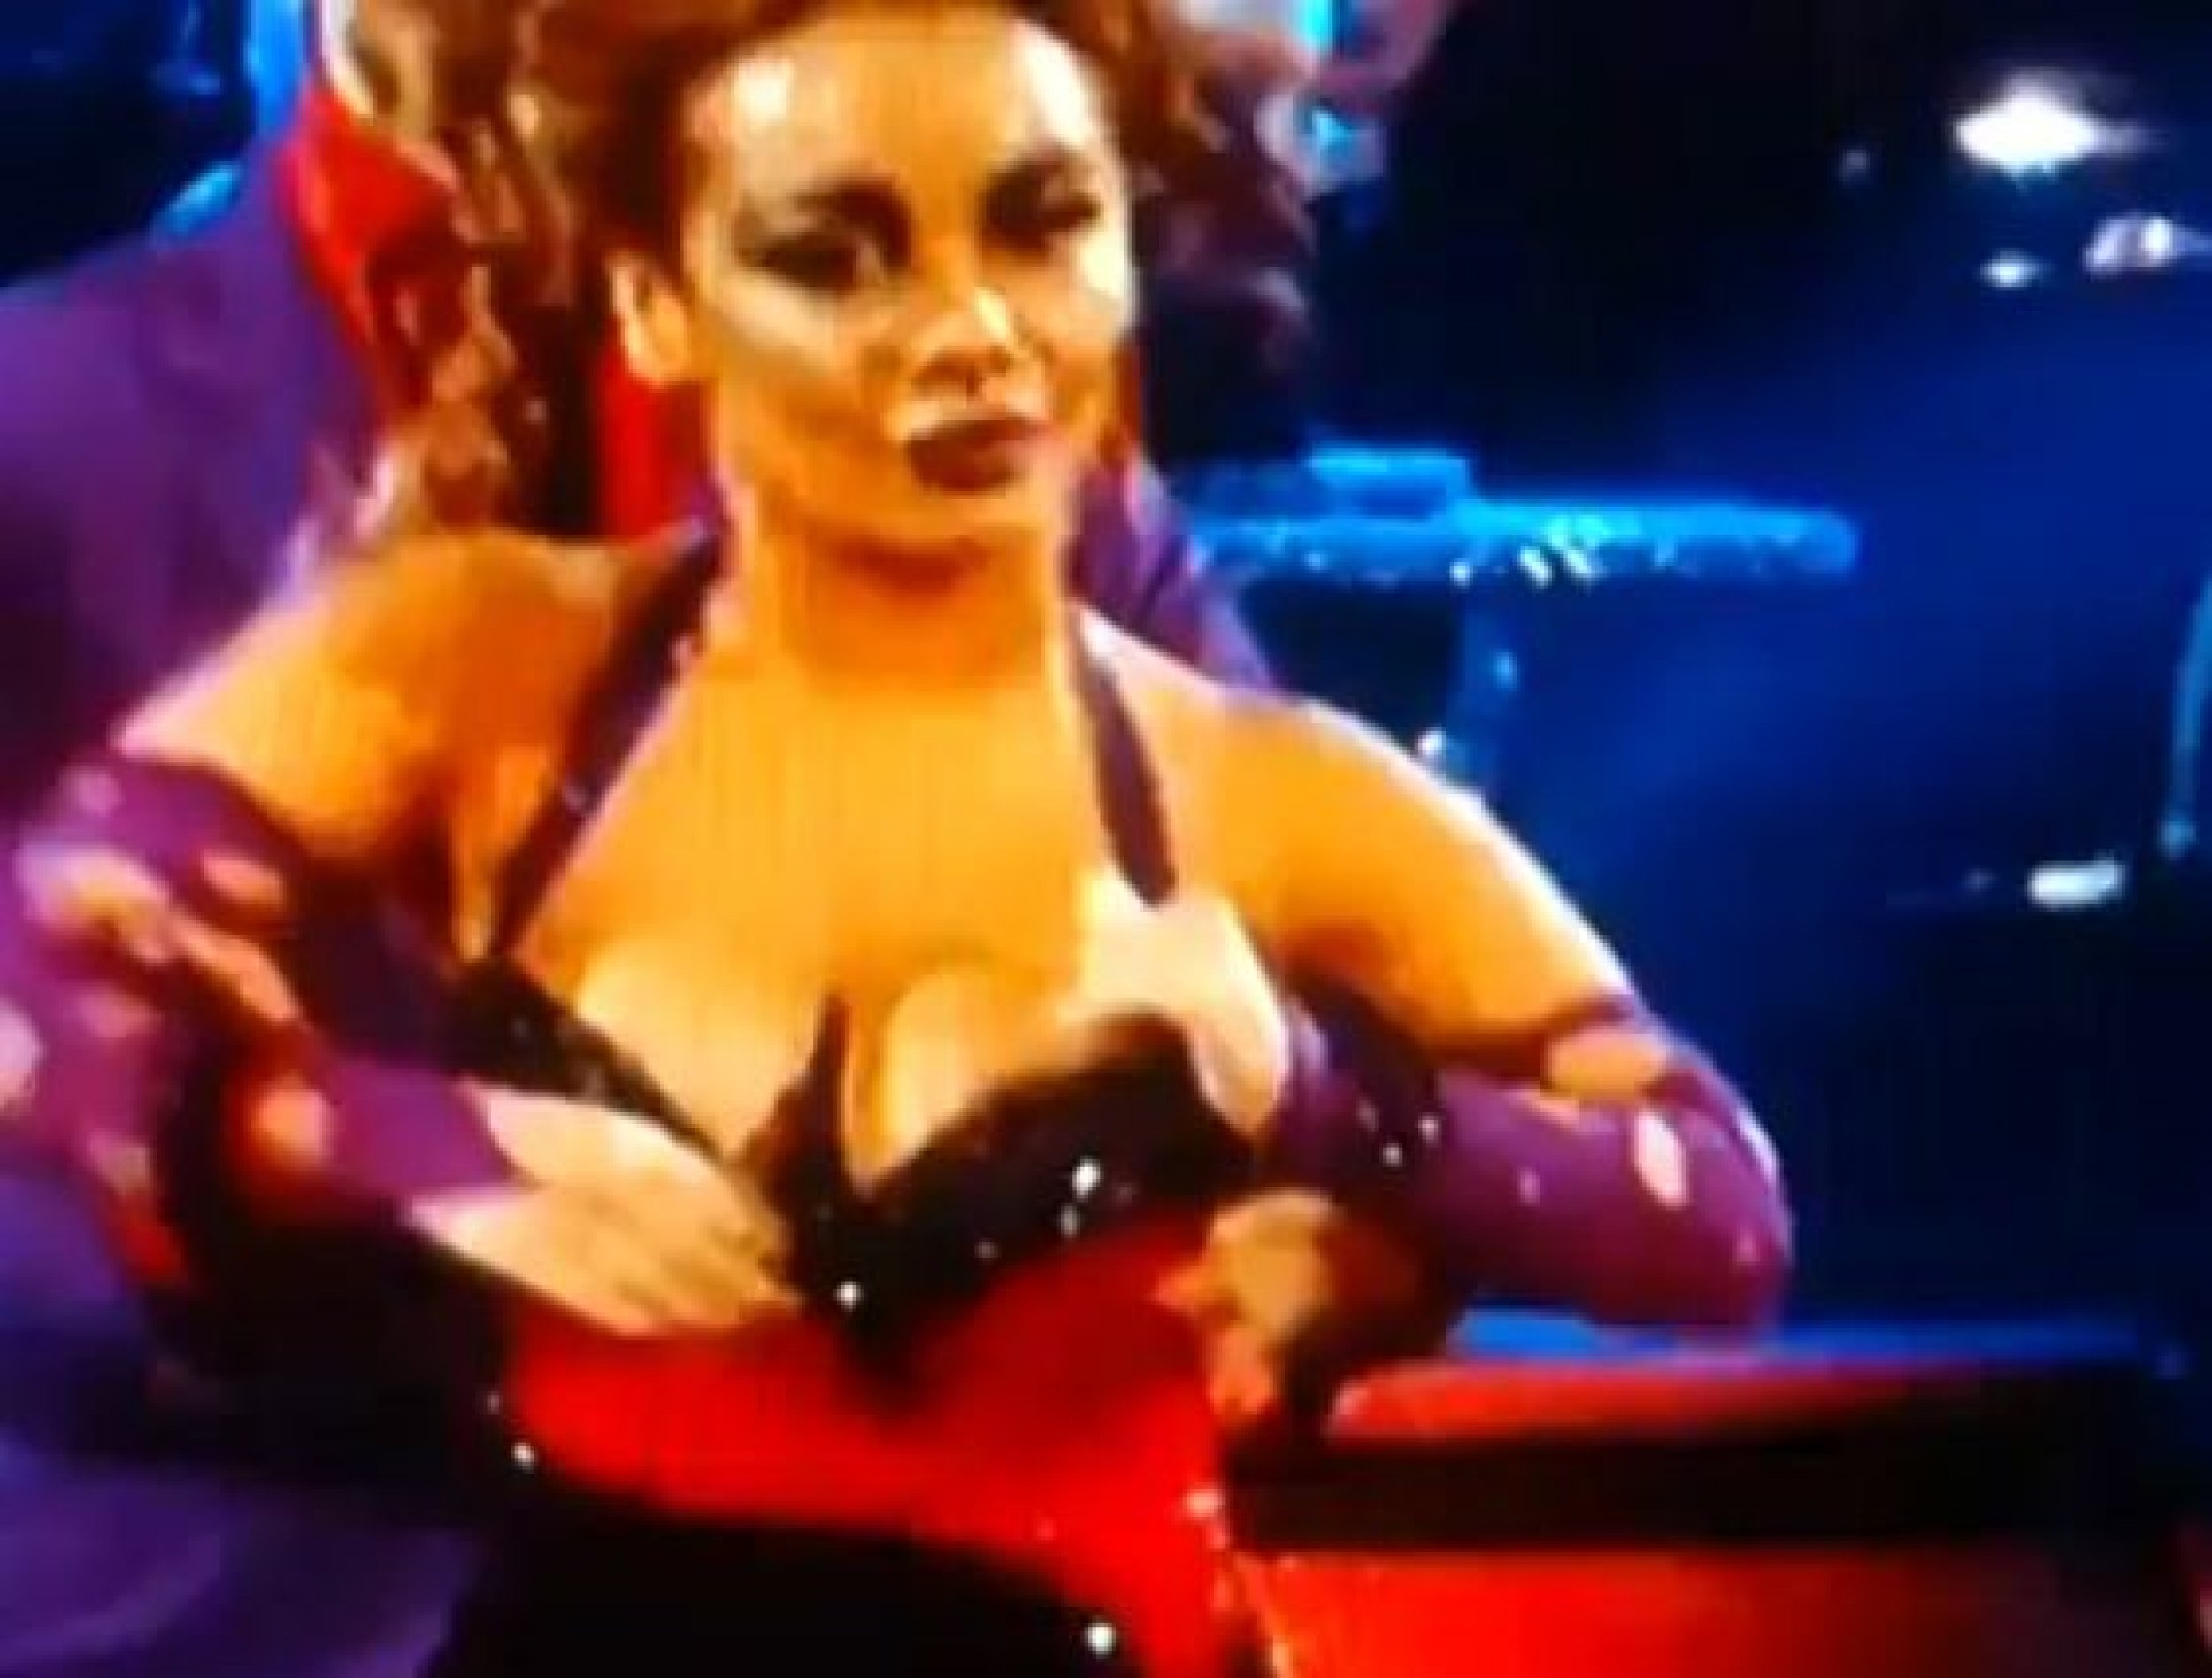 Chelsee Healey Nip Slip: 'Accidental' Wardrobe Malfunction on 'Strictly's  Halloween Special Exposed Much More [PHOTOS, VIDEO]